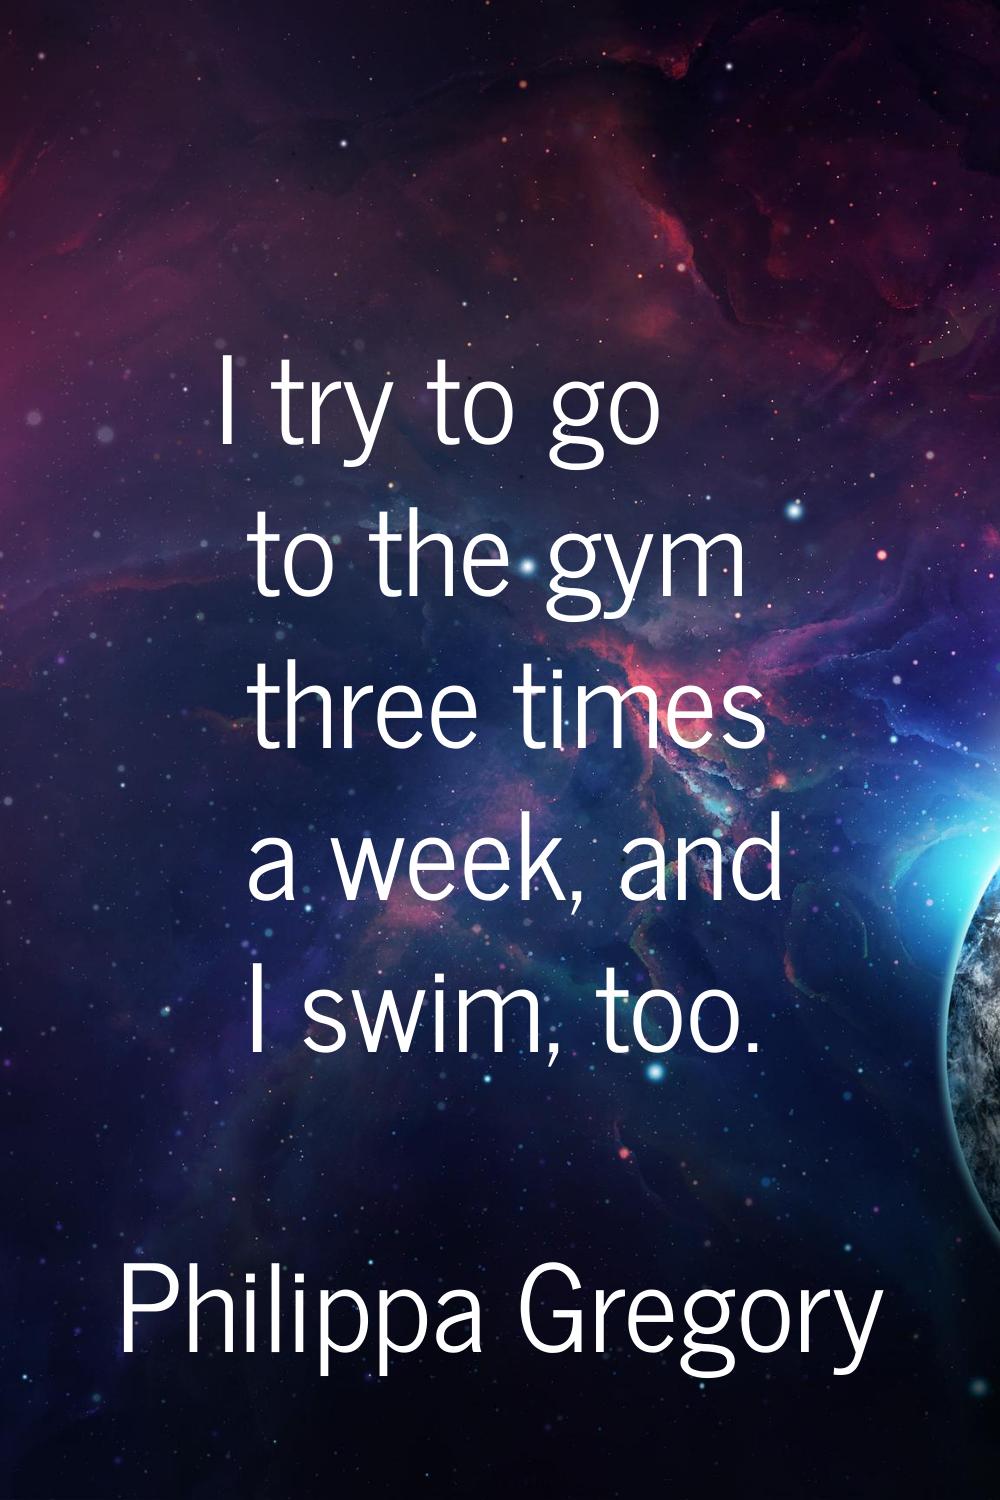 I try to go to the gym three times a week, and I swim, too.